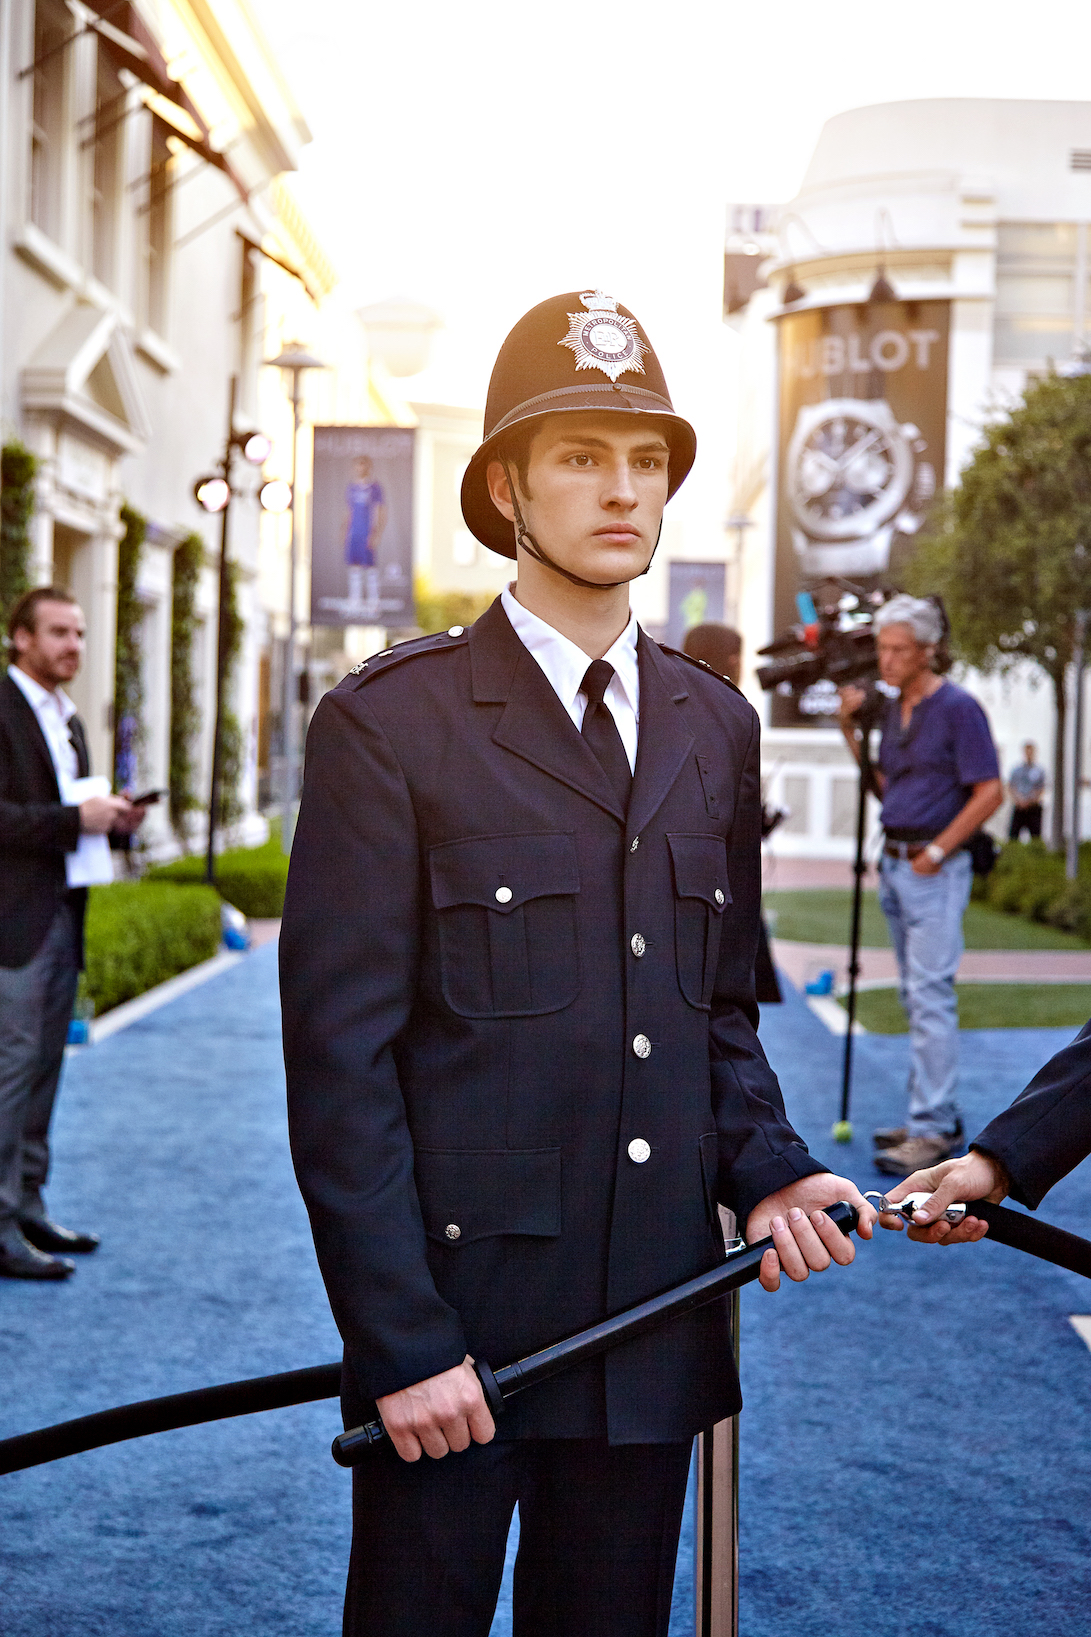 a person in a uniform holding a sword